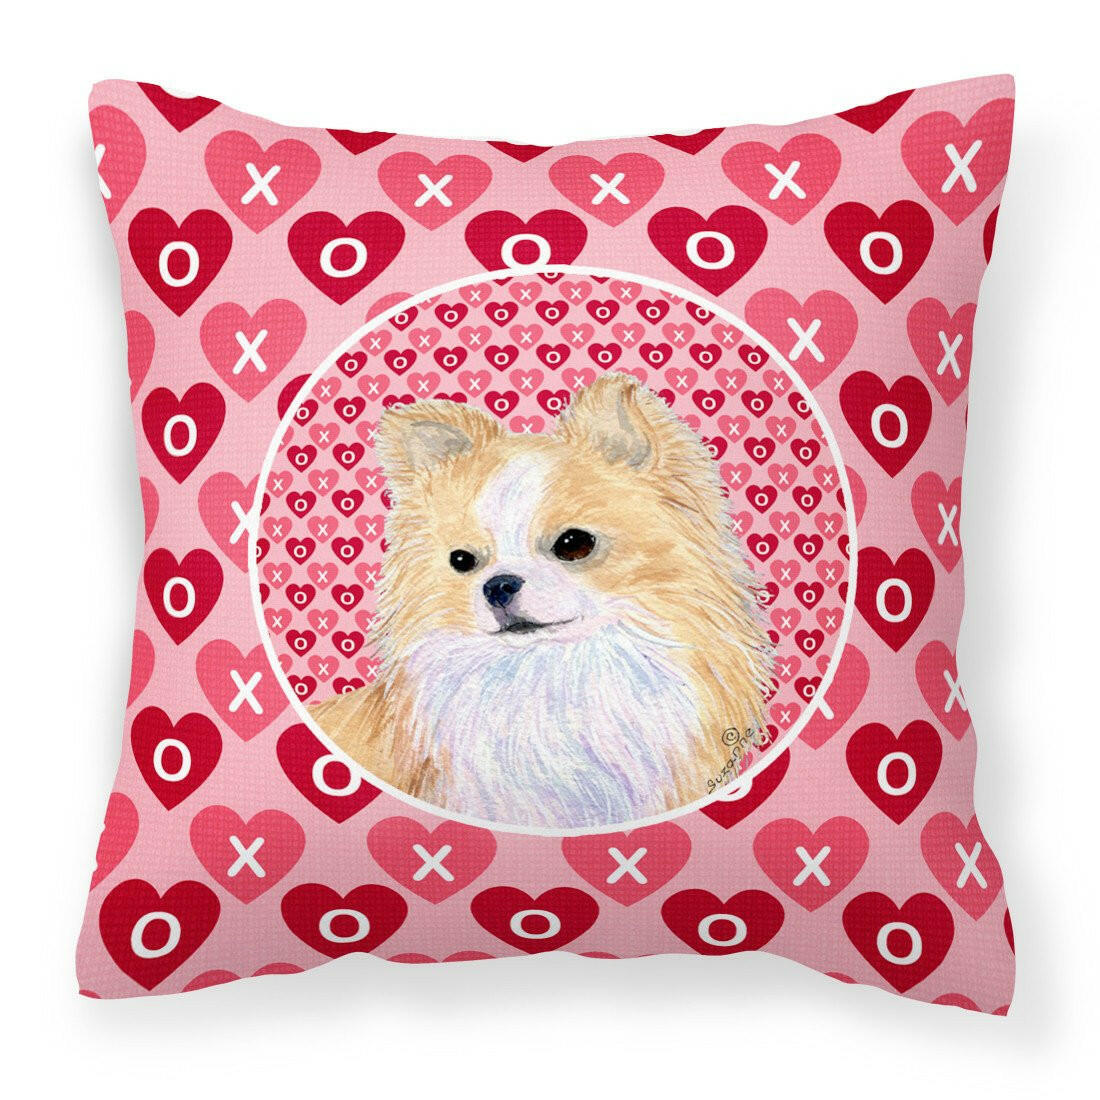 Chihuahua Hearts Love and Valentine's Day Portrait Fabric Decorative Pillow SS4473PW1414 by Caroline's Treasures